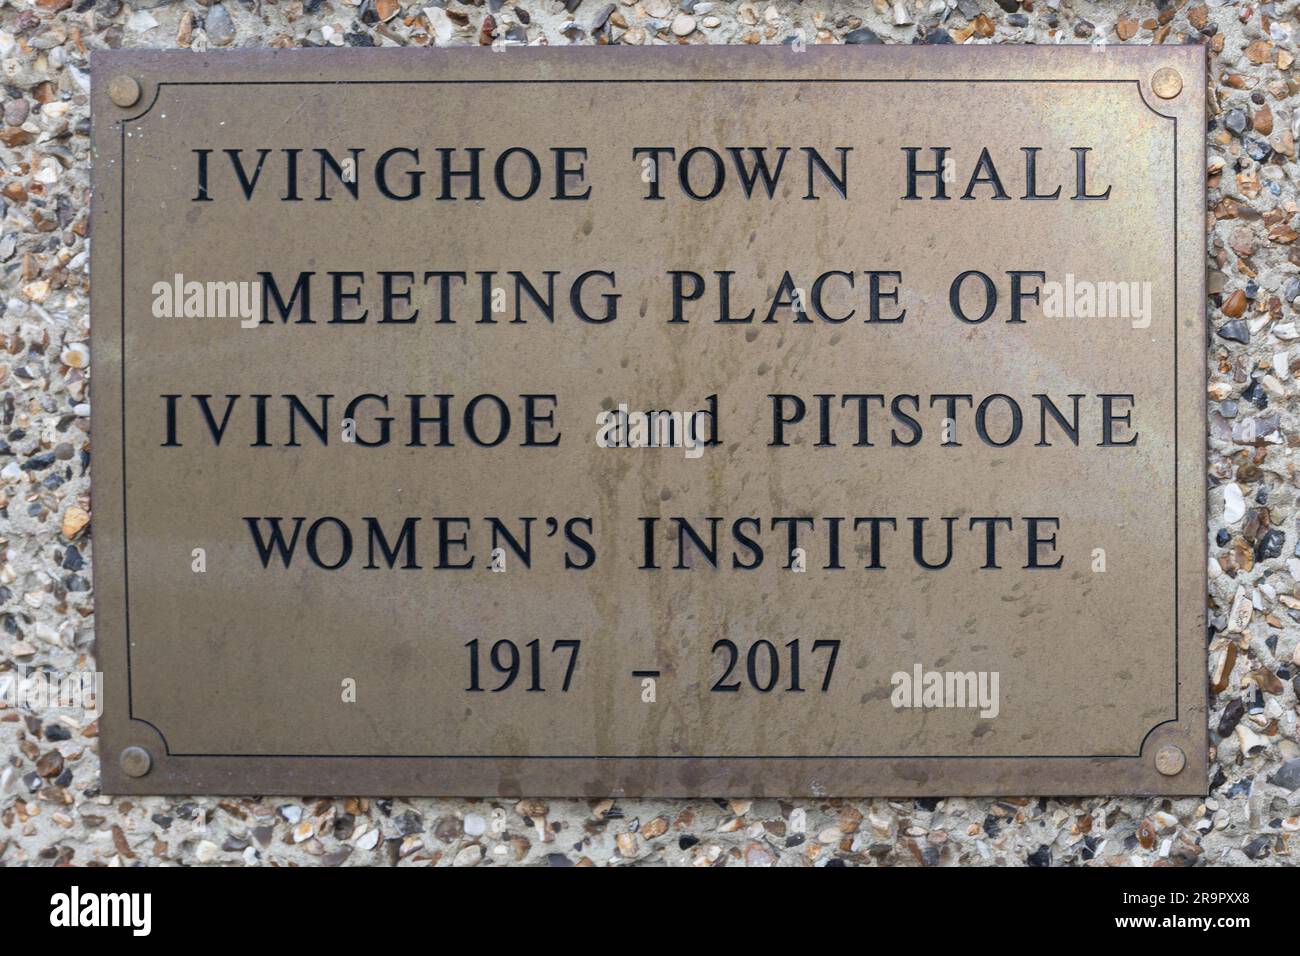 Plaque on Ivinghoe town hall, meeting place of the Ivinghoe and Pitstone Women's Institute 1917 - 2017, centenary, Buckinghamshire, England, UK Stock Photo